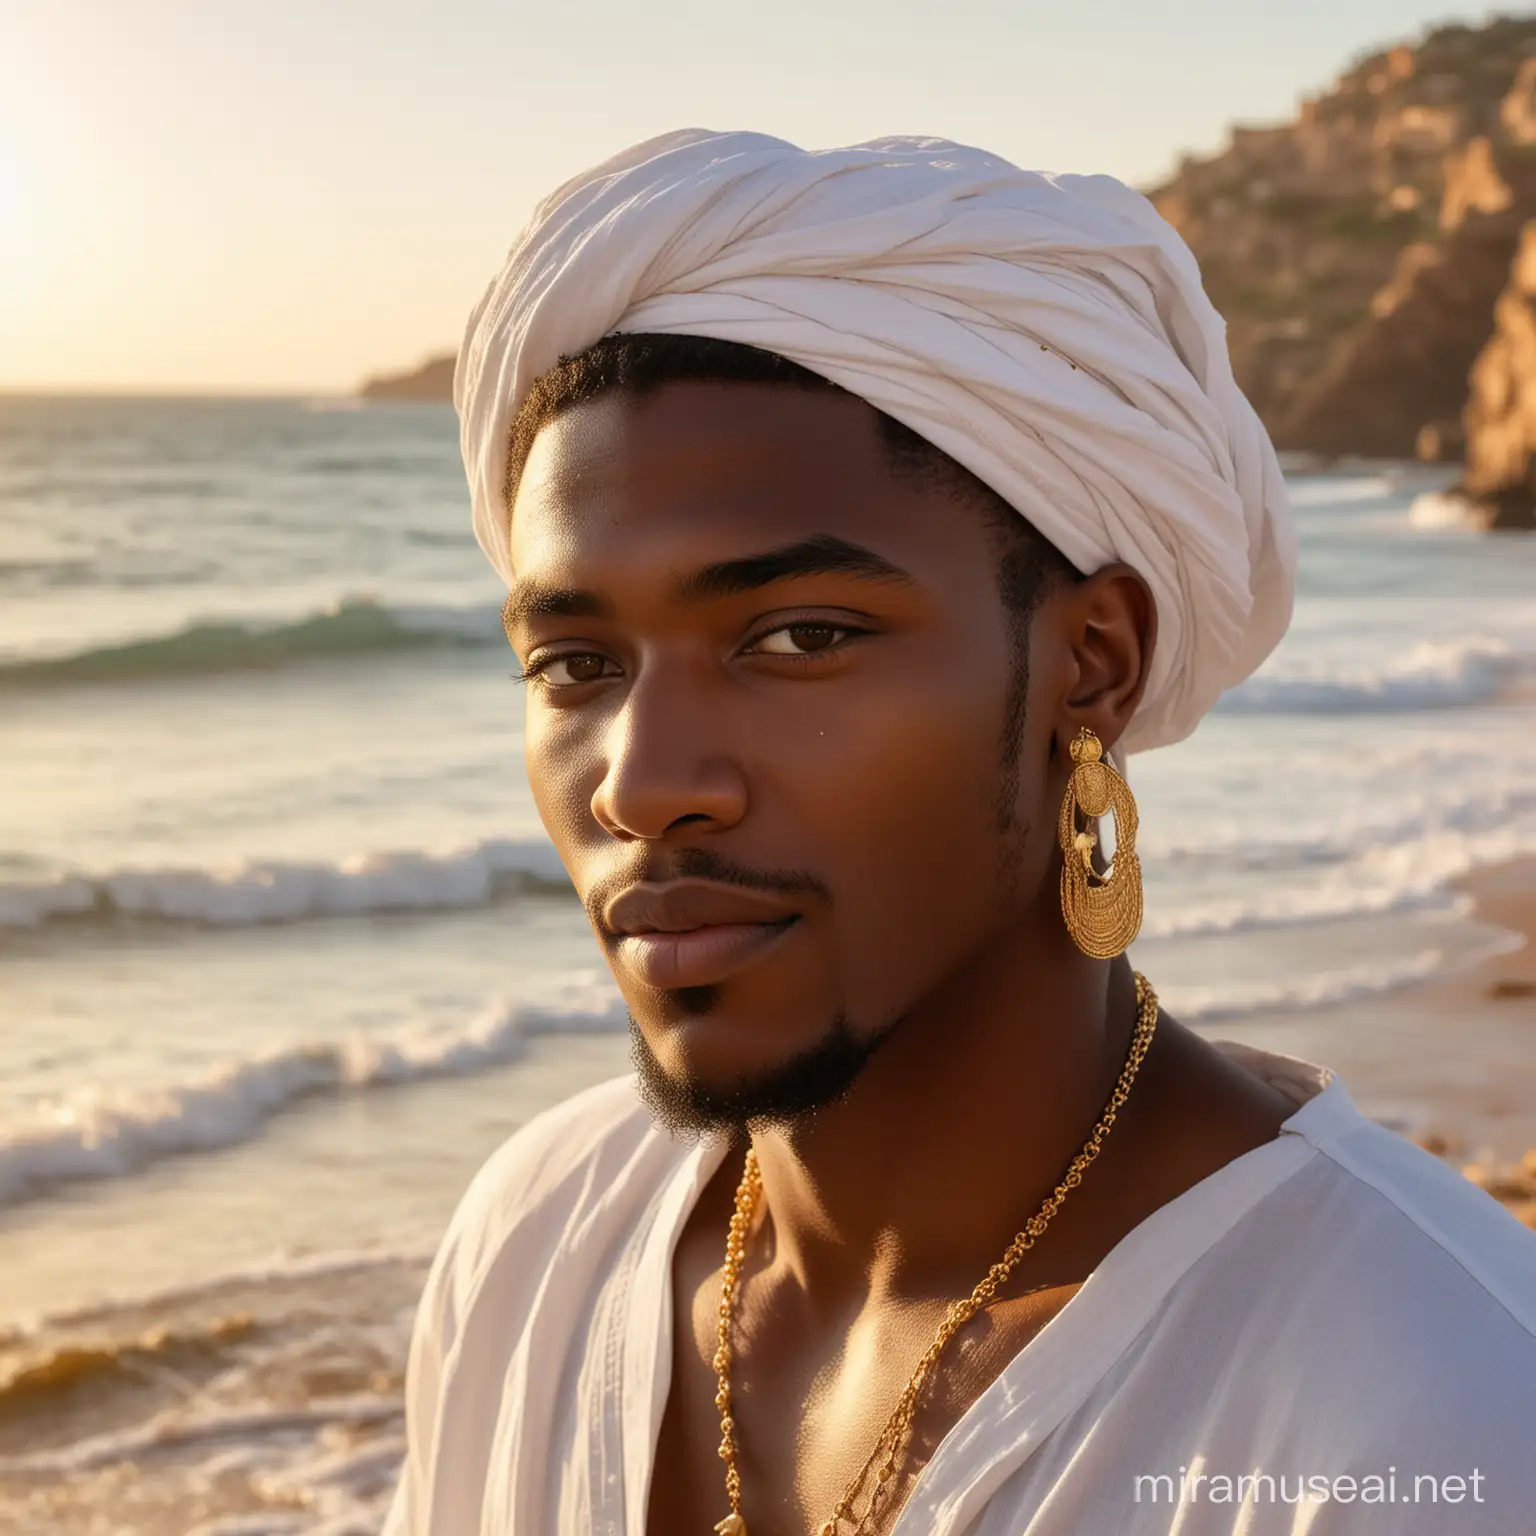 Young ancient Black Israelite about 20 years old who in a warm environment with sun shinning and ocean near him.the environment is vibrant and he is wearing all white with gold earrings 